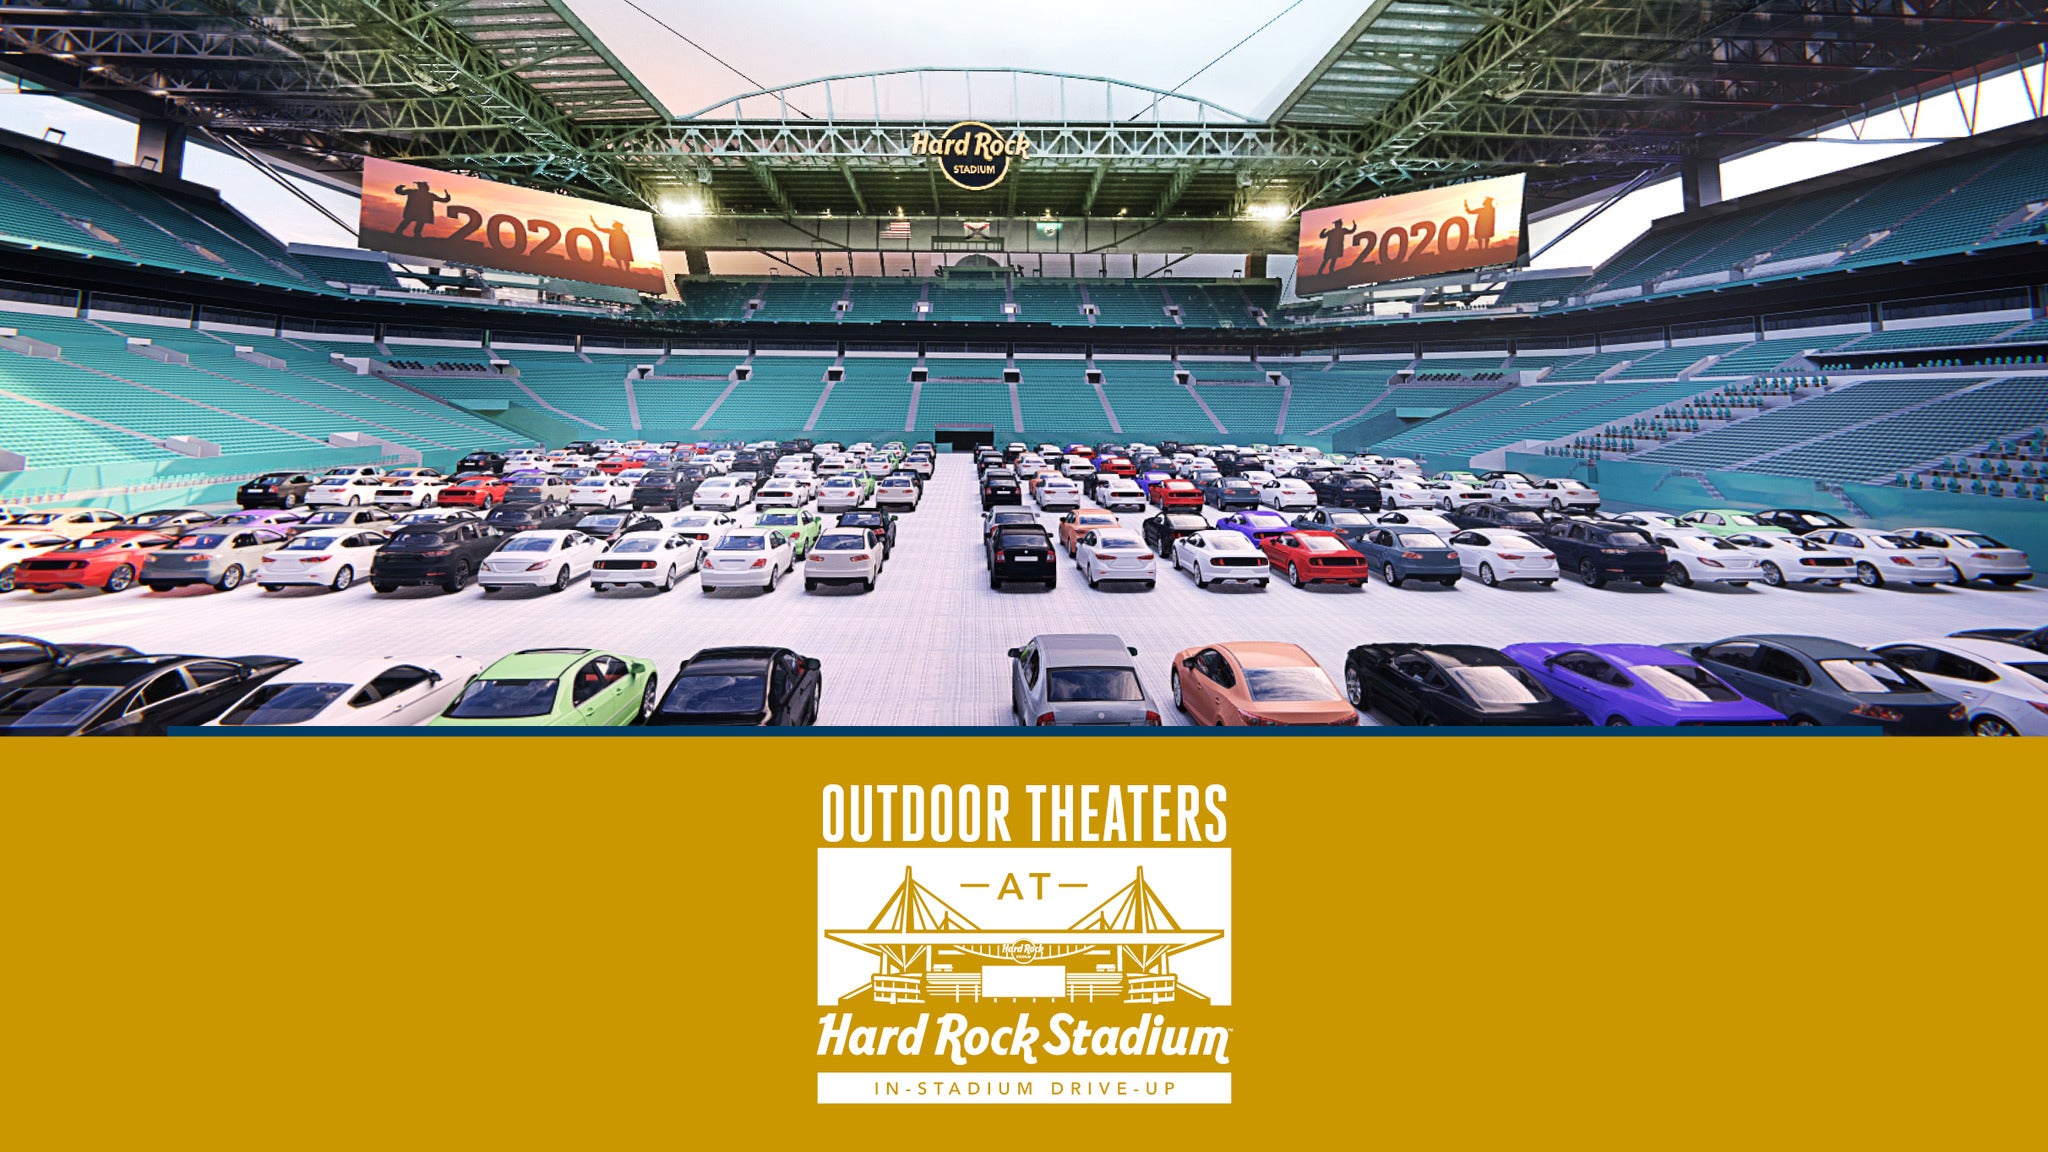 In-stadium Drive-up: Super Bowl VII in Miami promo photo for Exclusive presale offer code